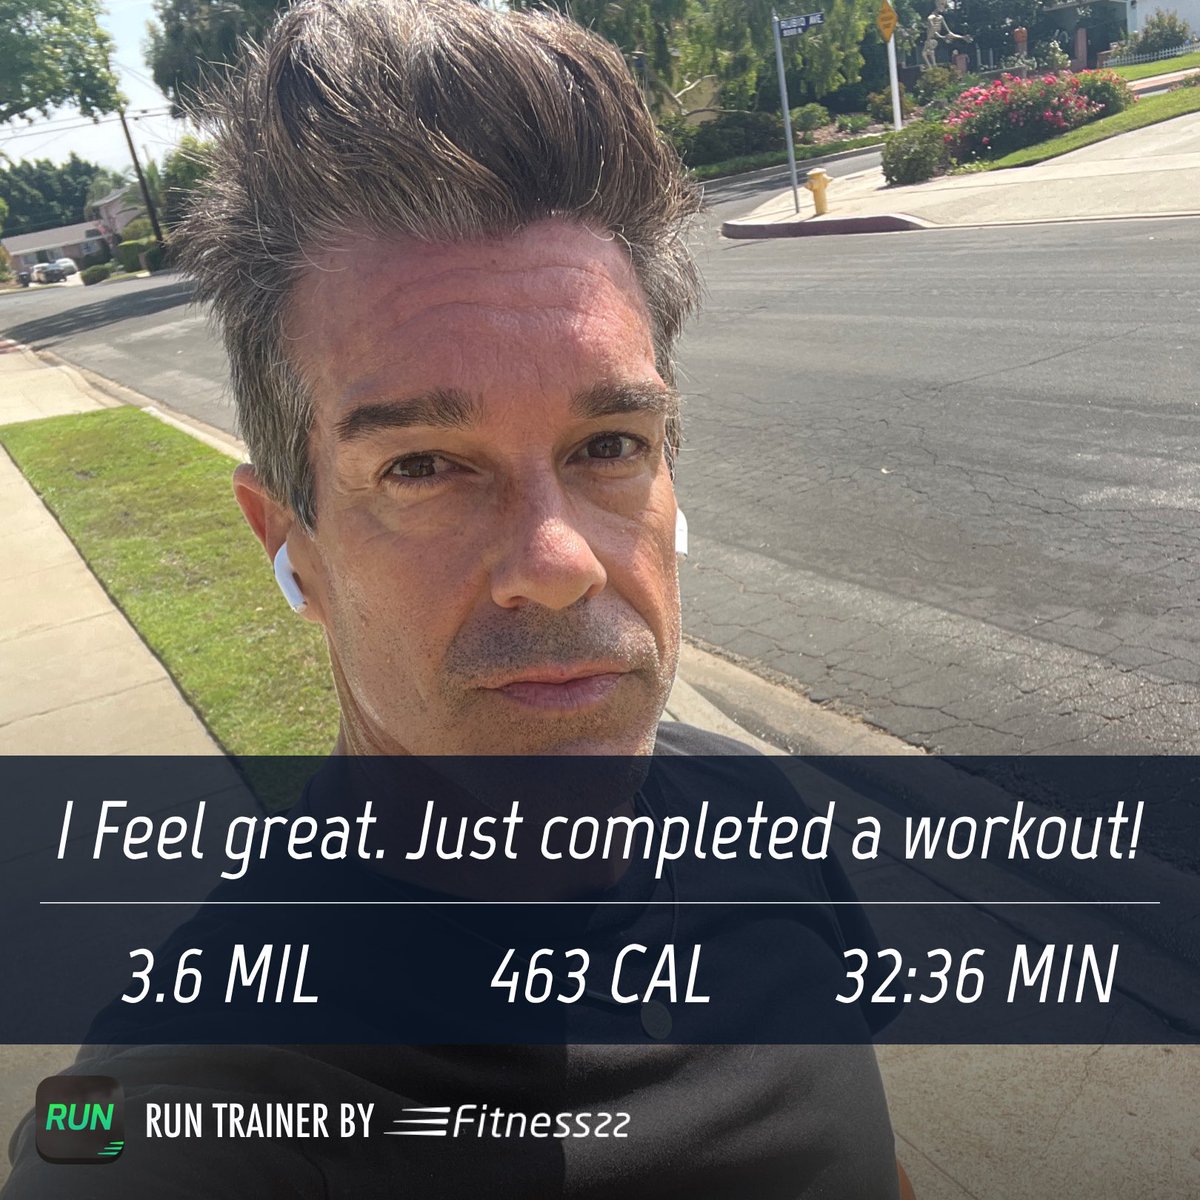 Happy Friday ! Workout completed feeling good but older ! LOL 😂 #workout #run #running #ﬁtness #fitnessmotivation #fitnessaddict #stayinghealthy #stayingfit #hardwork #paysoff #letsgo